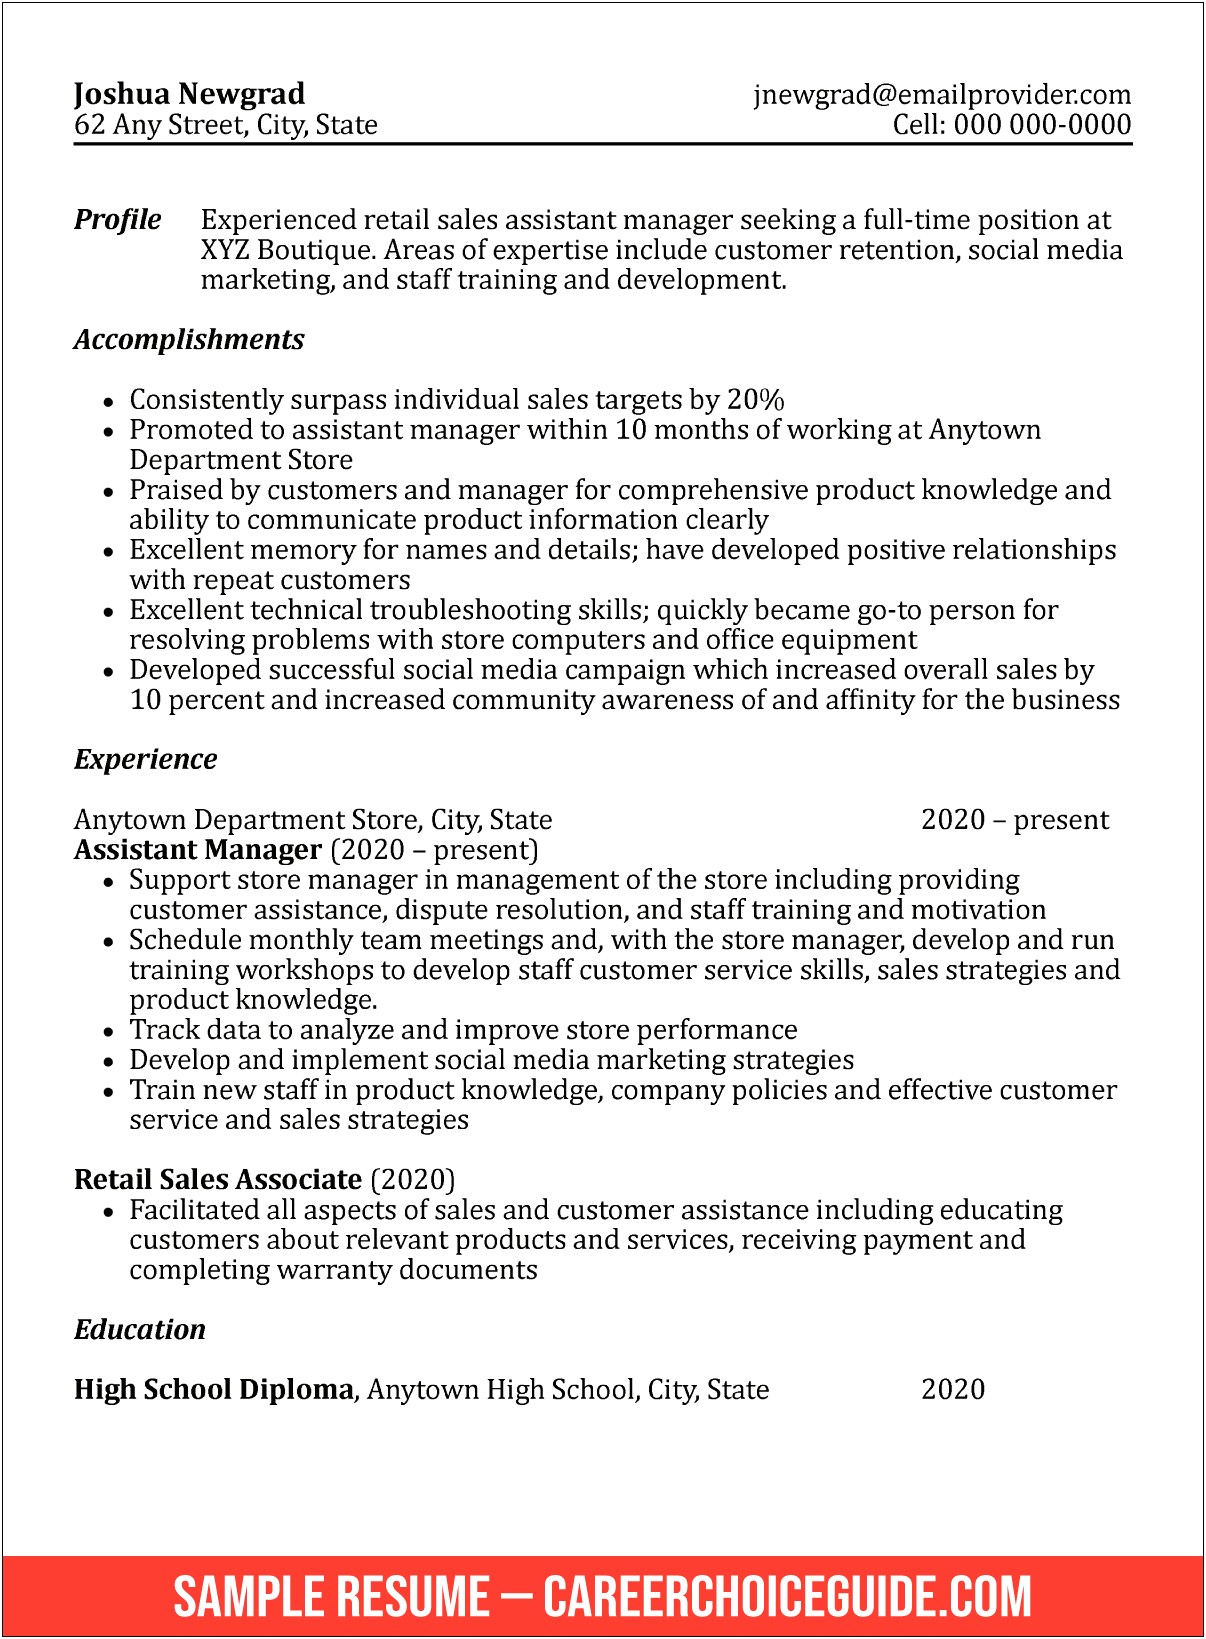 Resume After High School Example